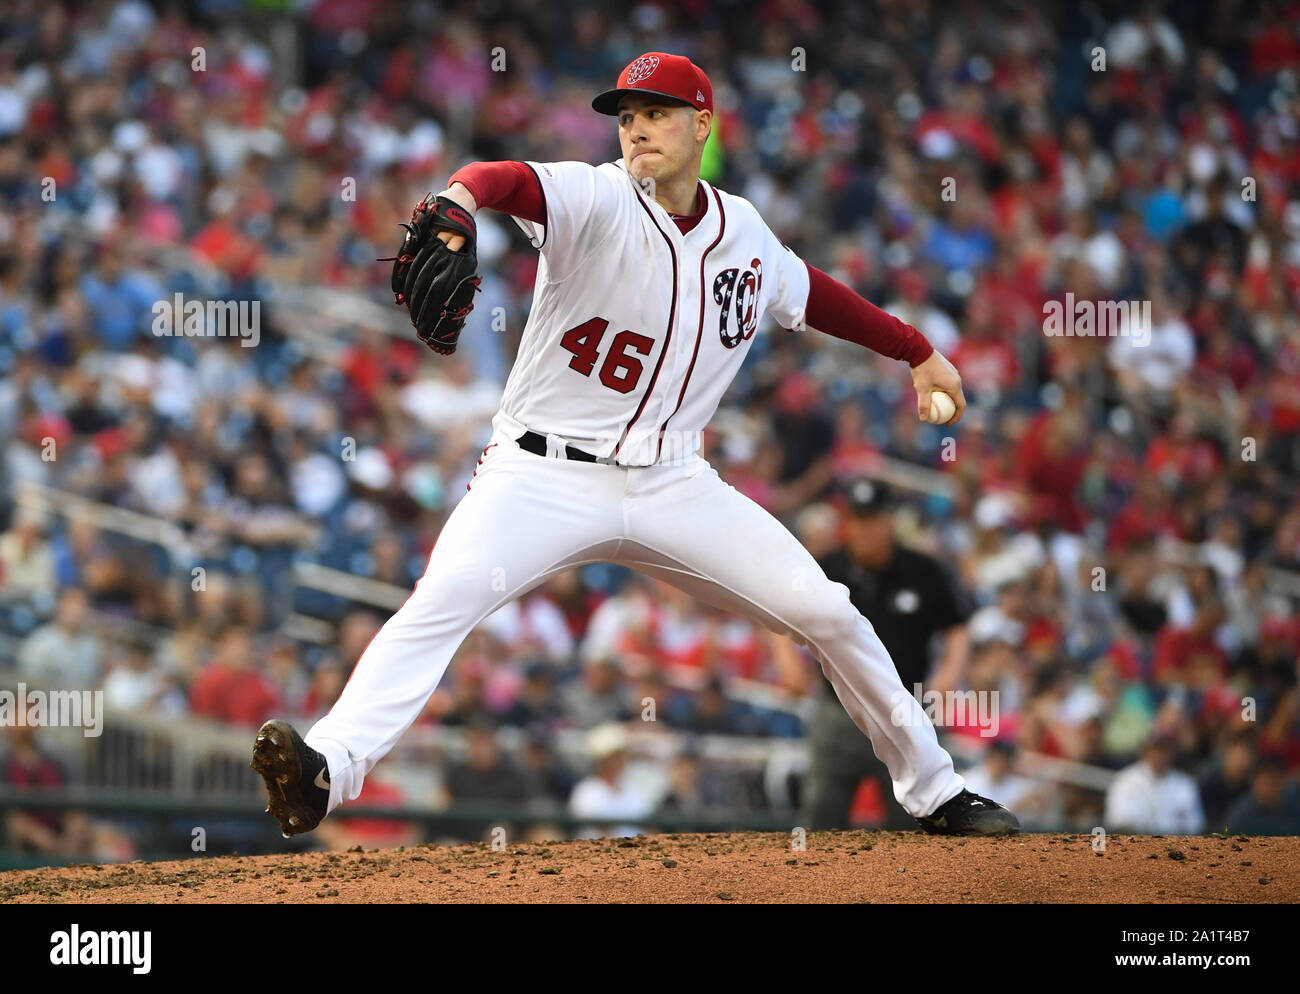 Washington, United States. 28th Sep, 2019. Washington Nationals starting pitcher Patrick Corbin (46) pitches against the Cleveland Indians at Nationals Park in Washington, DC on Saturday, September 28, 2019. Photo by Kevin Dietsch/UPI Credit: UPI/Alamy Live News Stock Photo